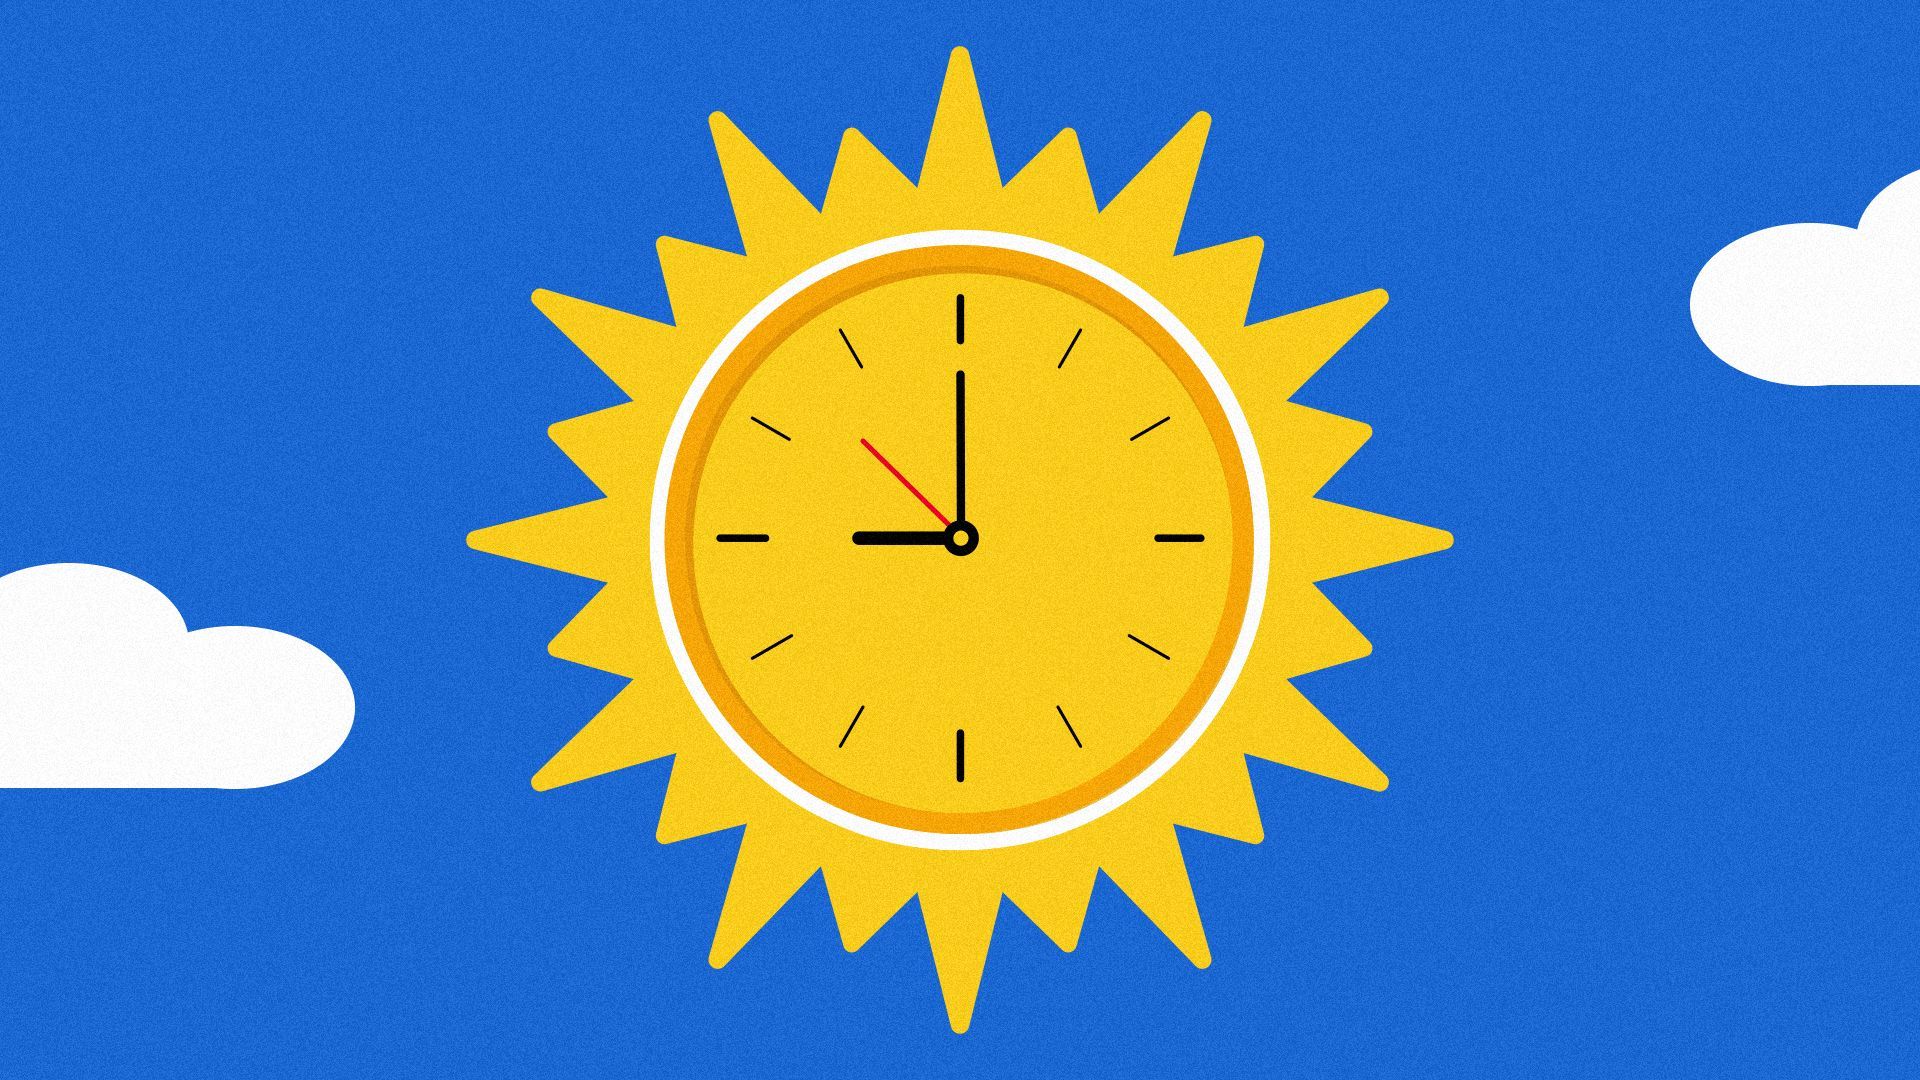 Illustration of a sun as a clock with clouds in the sky.